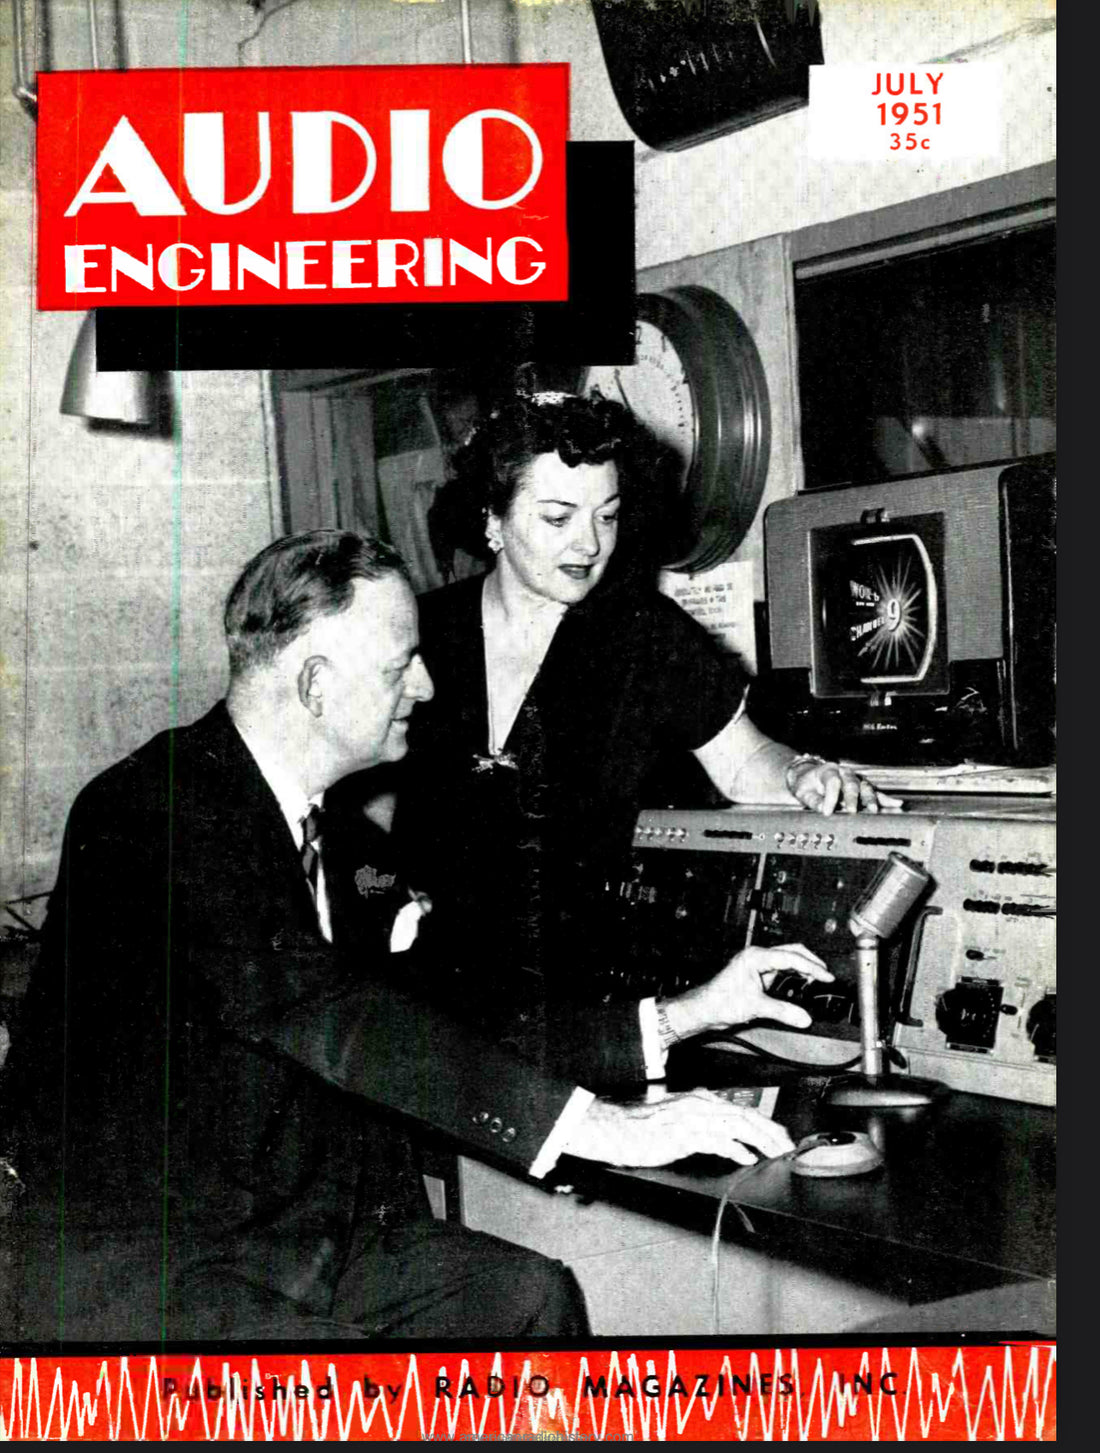 Revisiting 1950’s Audio Engineering